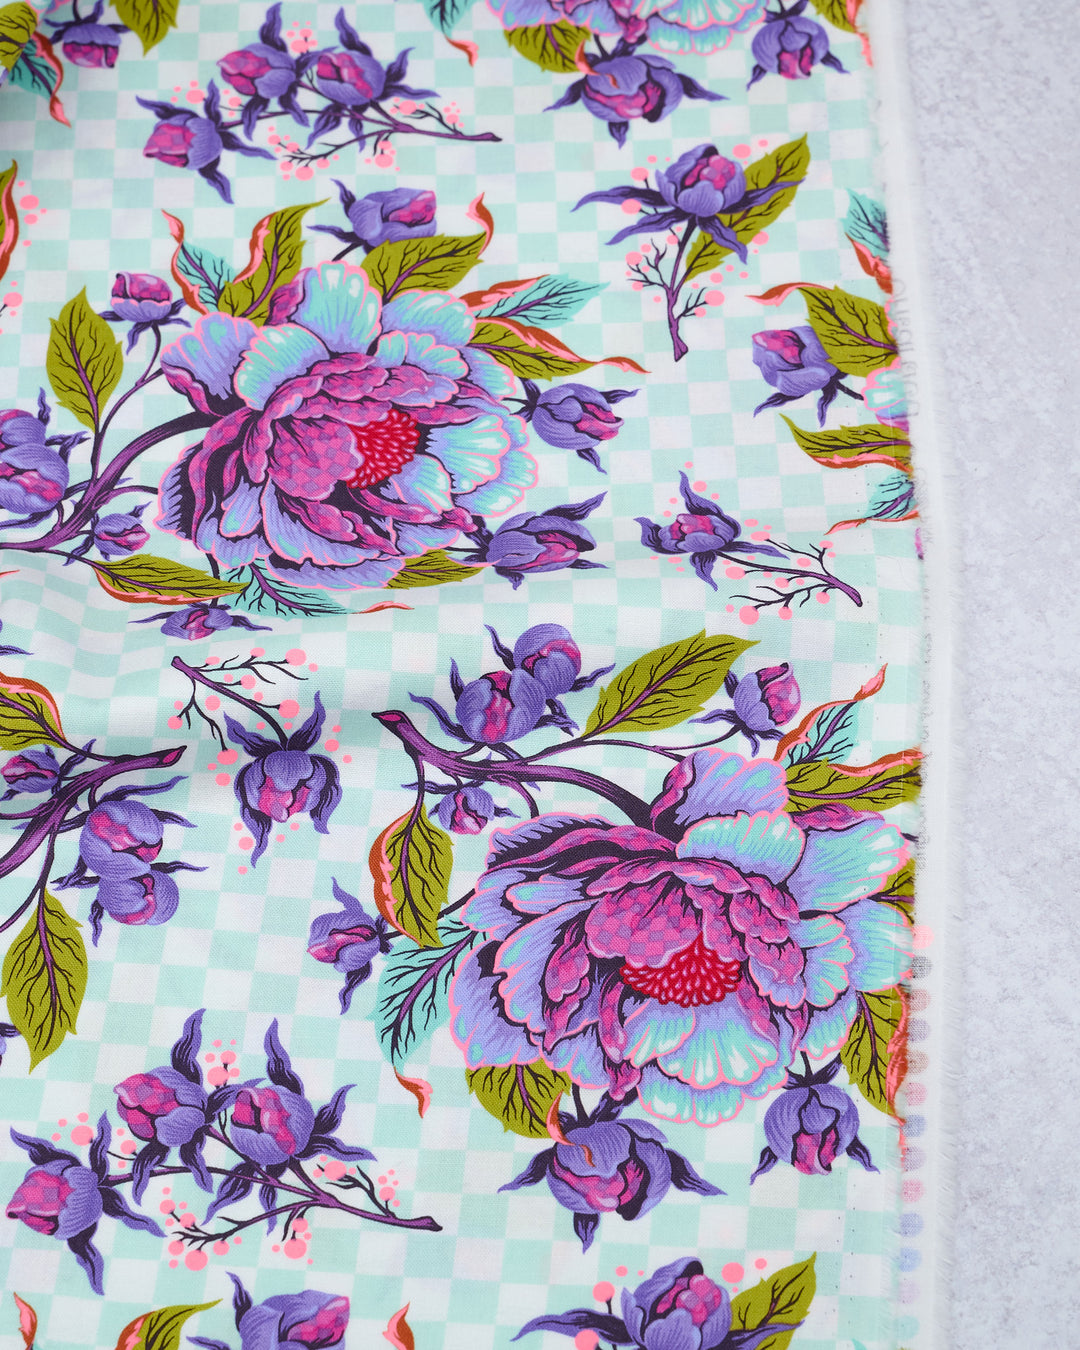 Untamed - Peony for Your Thoughts in Nova - Tula Pink - PWTP235.NOVA - Half Yard